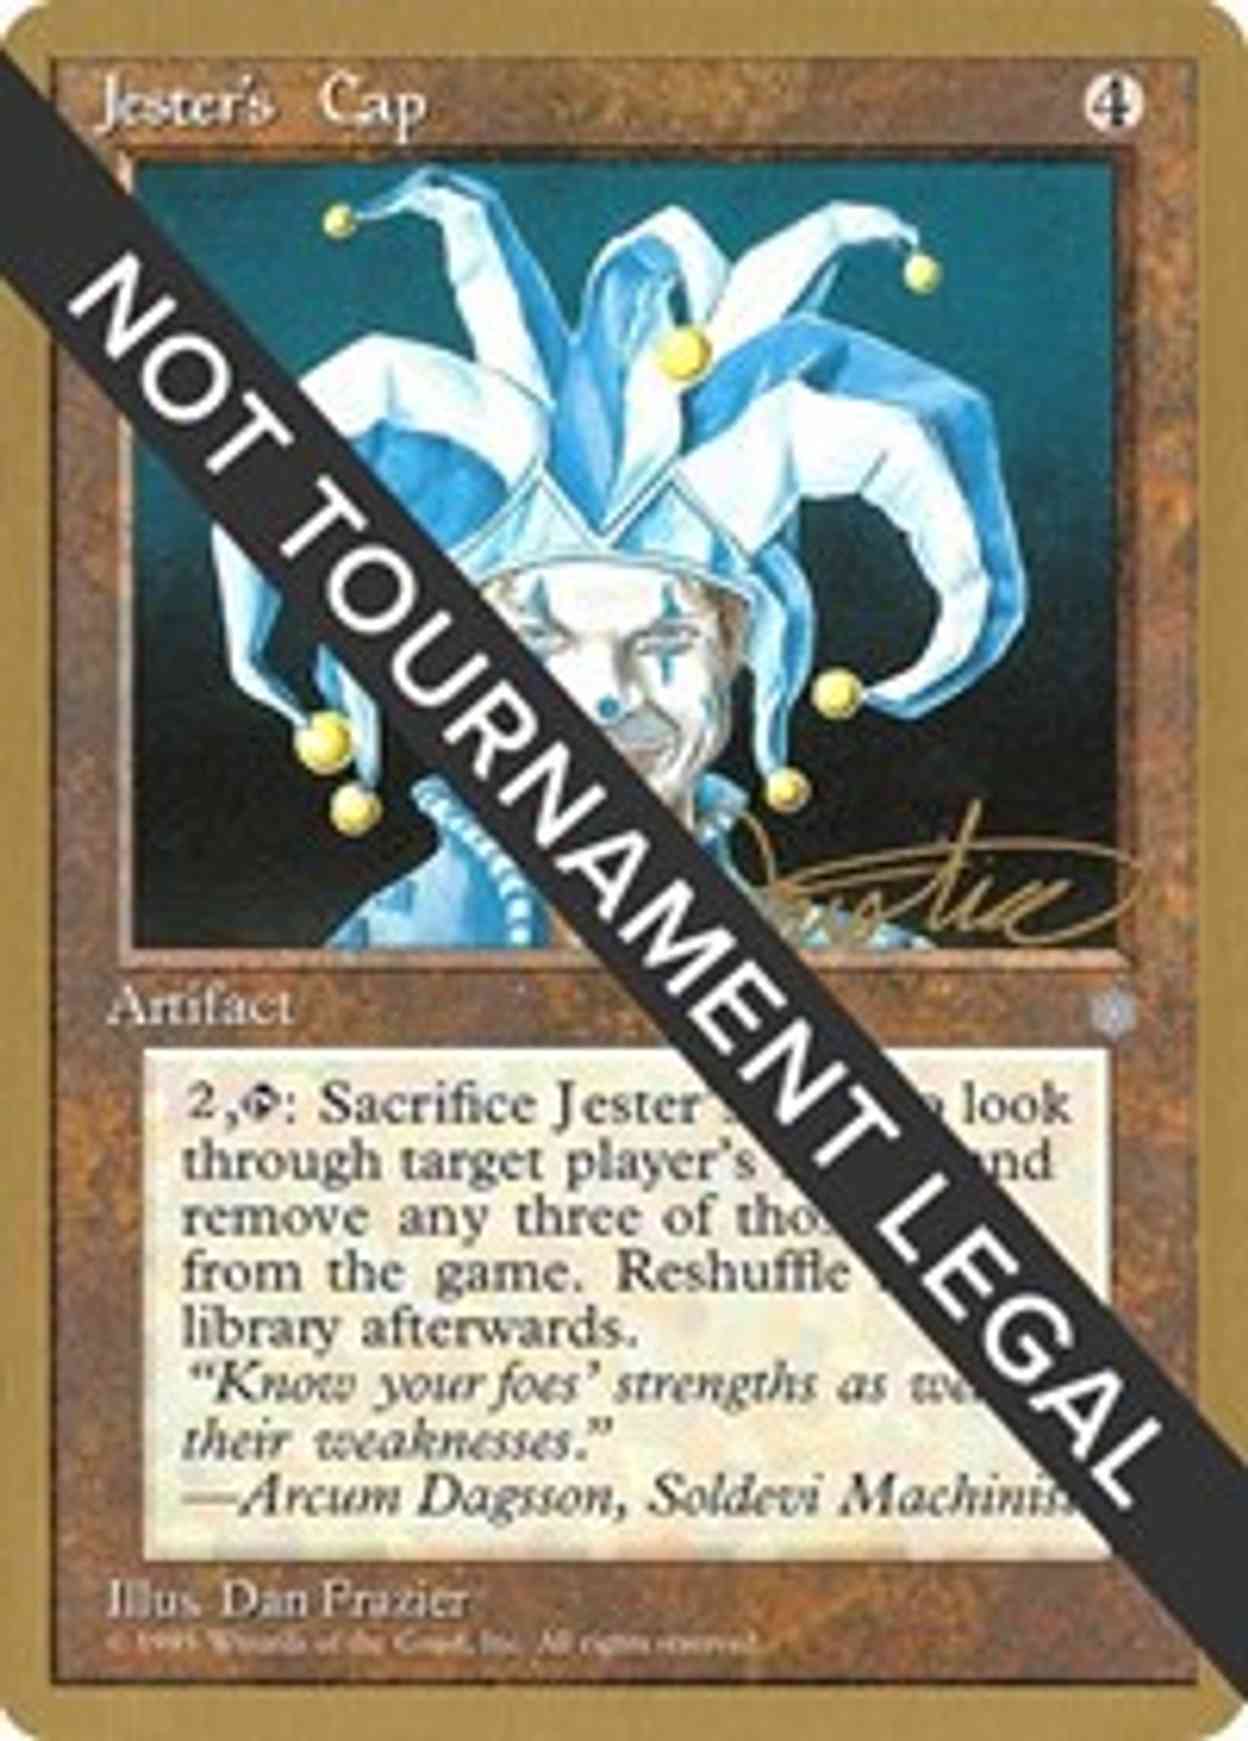 Jester's Cap - 1996 Mark Justice (ICE) magic card front